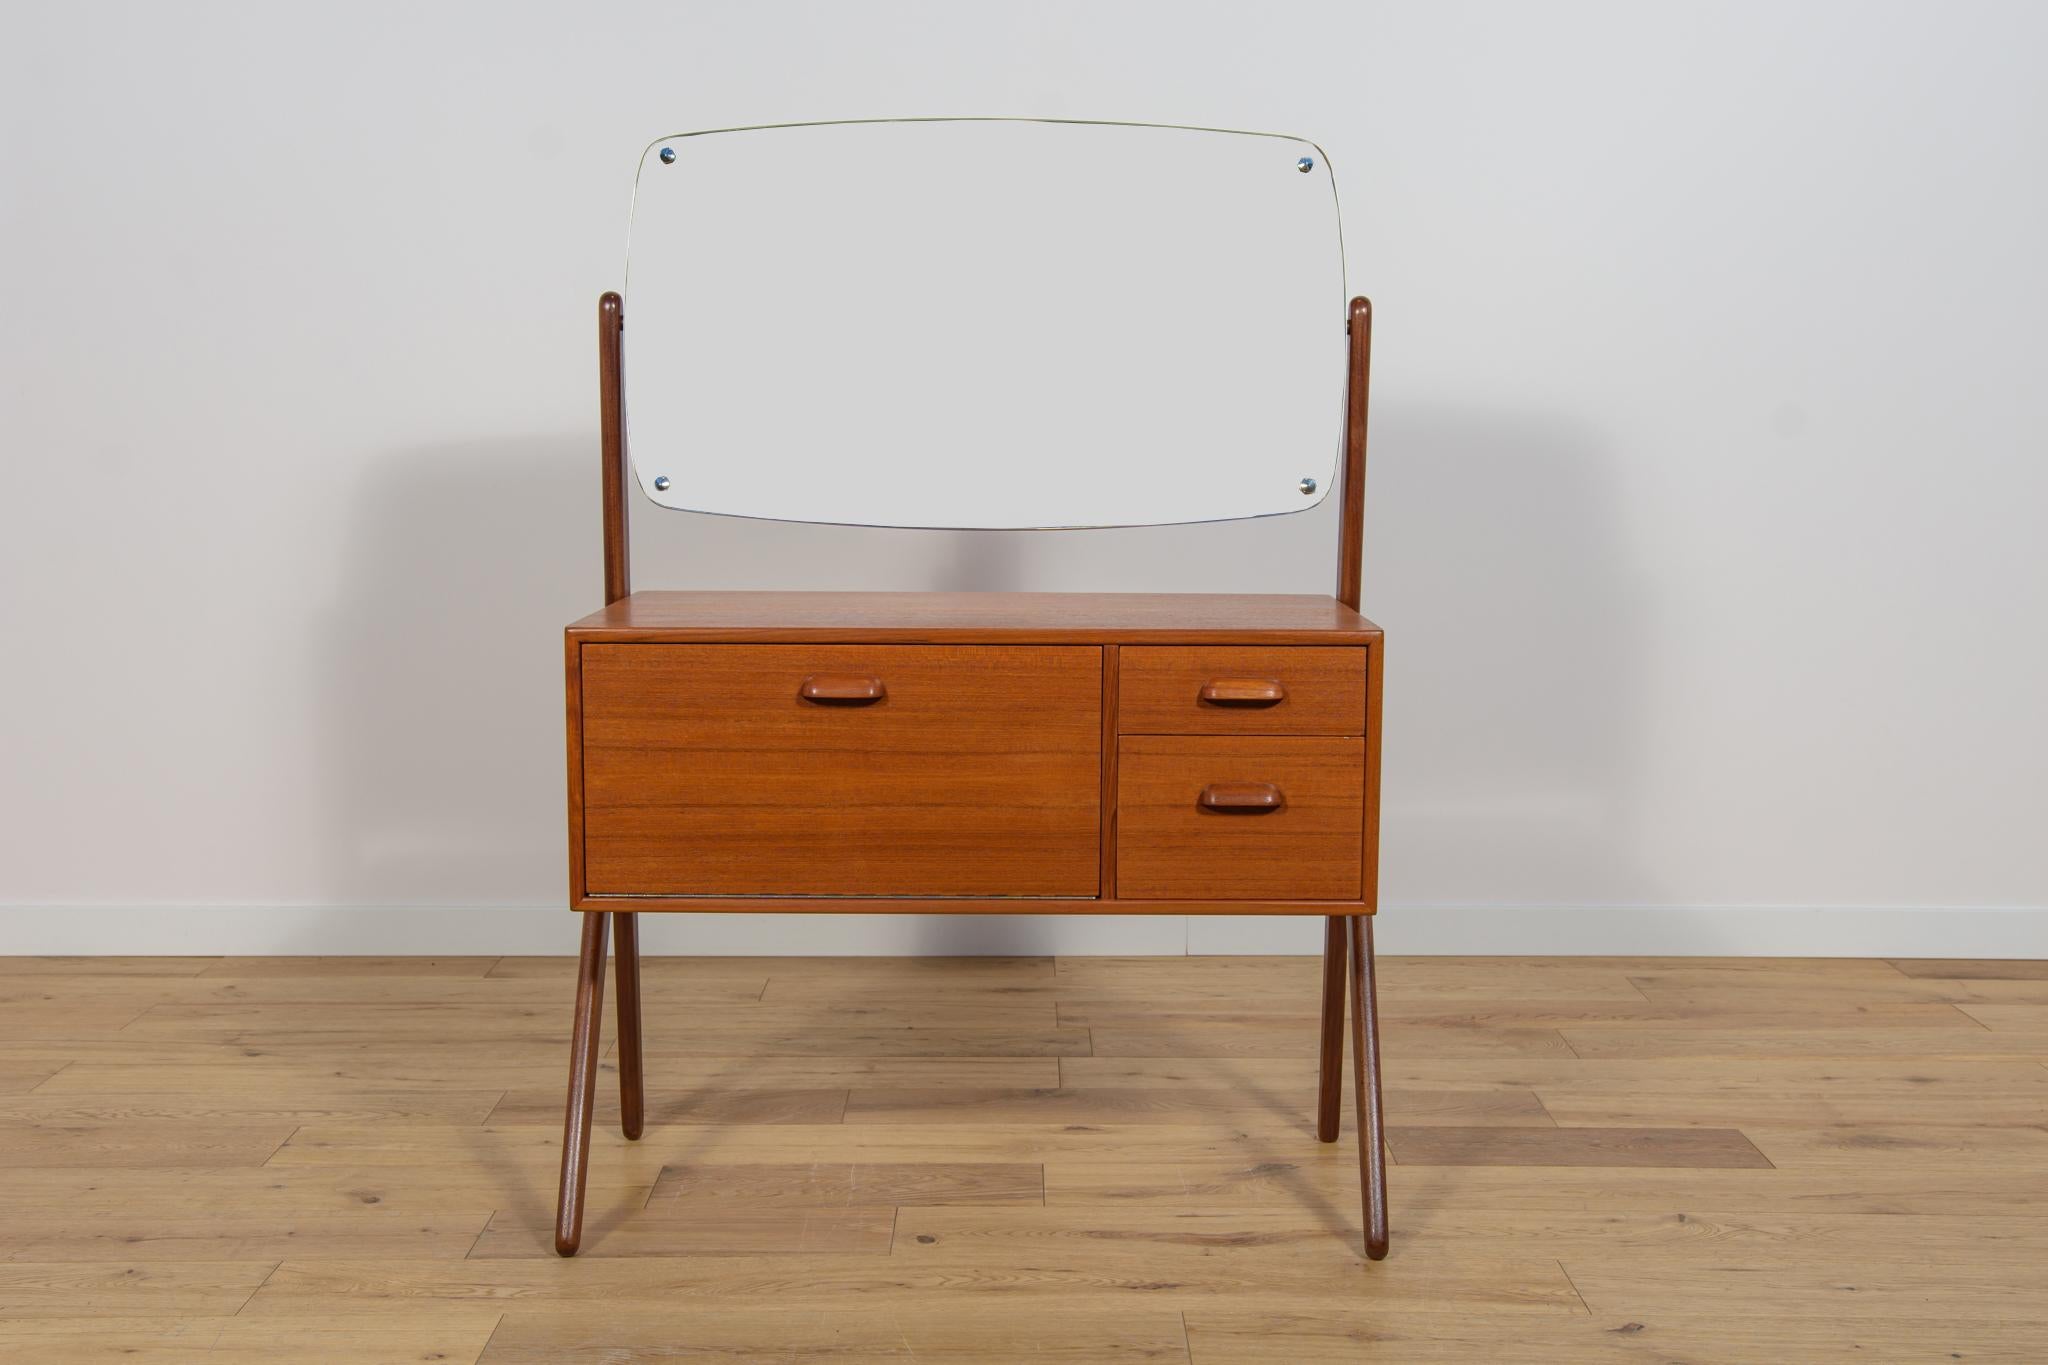 A small teak dressing table produced in the Danish factory Ølholm Møbelfabrik in the 1960s. It consists of two drawers and an opening cabinet. There is an adjustable mirror above. The furniture has been completely renovated, cleaned of old coating